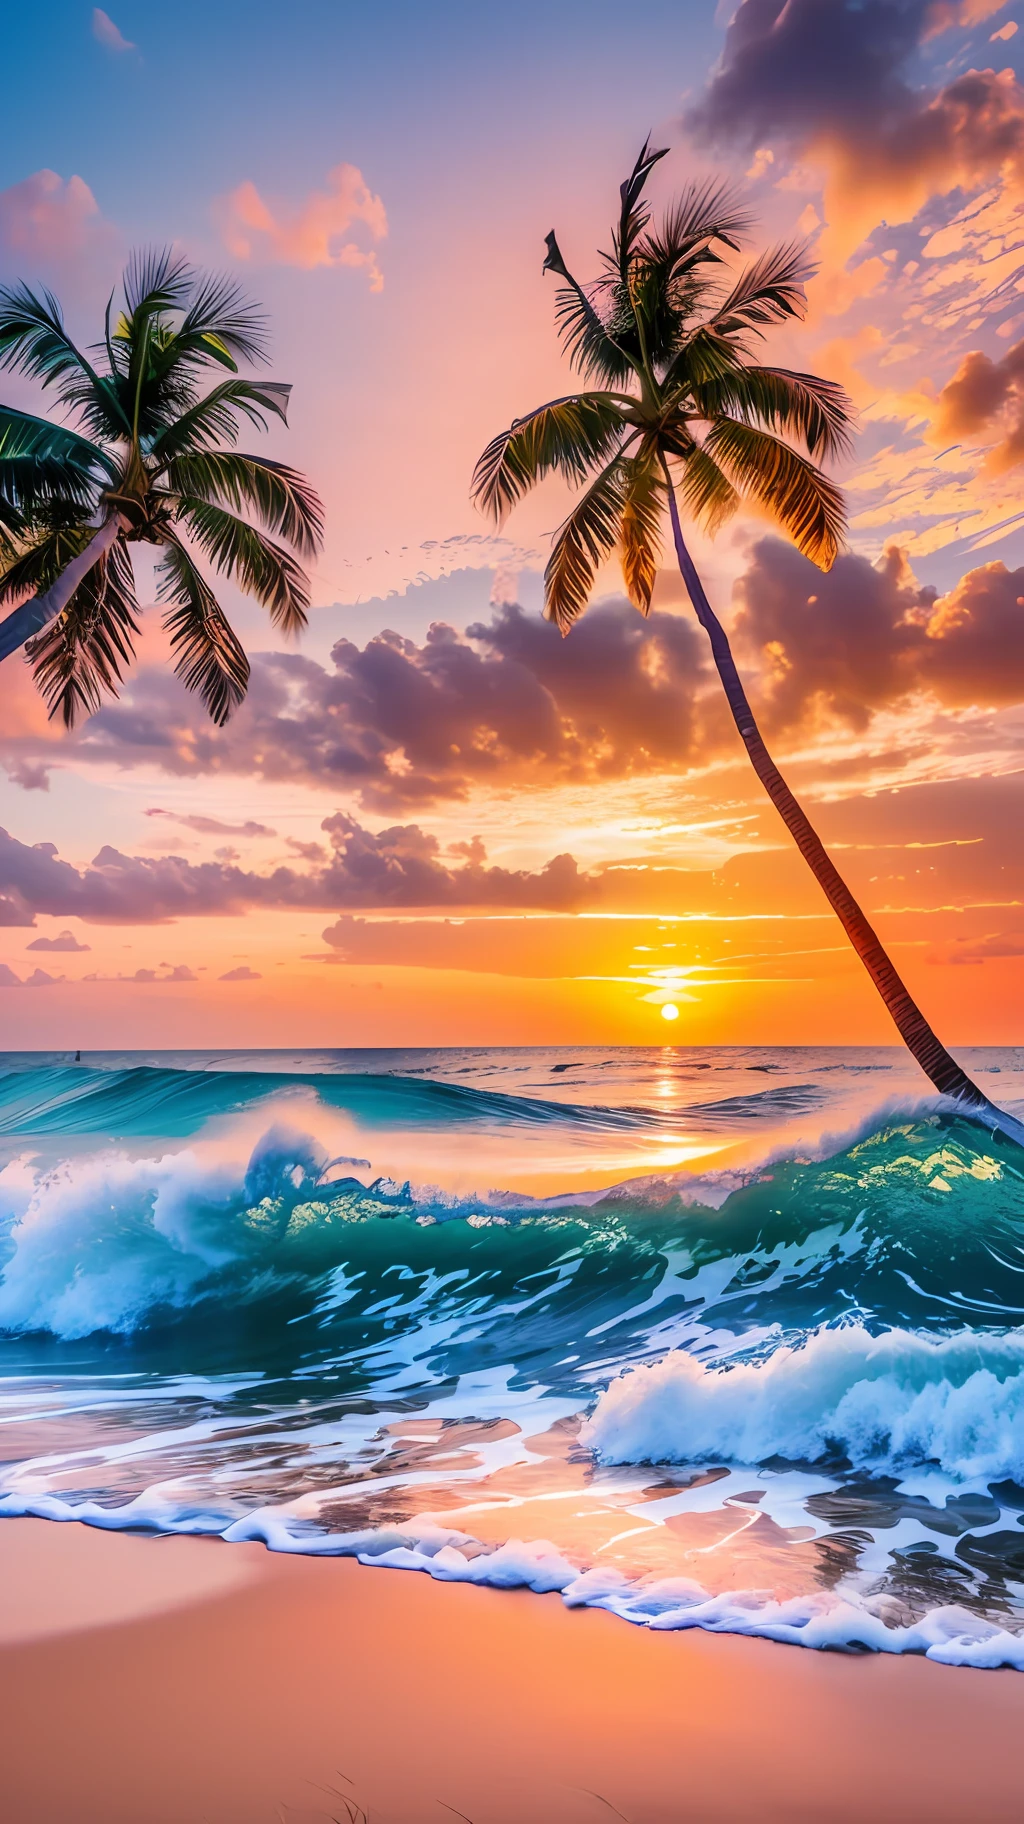 Create a 4K 9:16 image that depicts a stunning sunrise on a tropical beach, with gentle waves and palm trees along the coast. The color palette should be vibrant and convey a sense of renewal and positive energy. --auto --s2